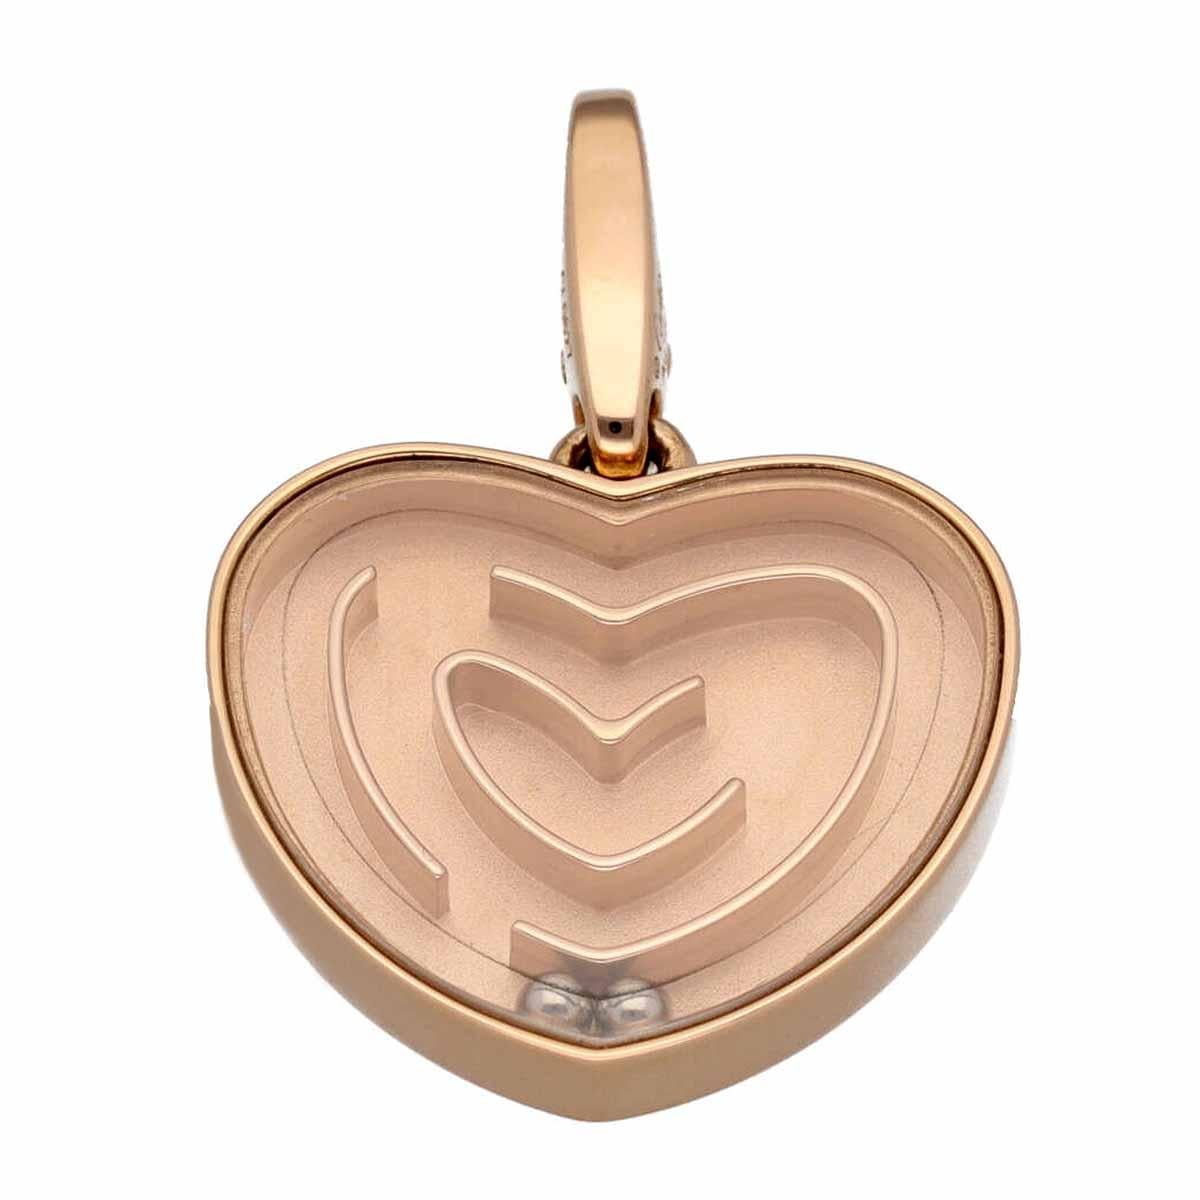 ■ Product Number: 23490901
■ Brand: Cartier
■ Product Name: Labyrinth Heart Motif Charm
■ Material: 750 K18 Pink Gold White Gold
■ Weight: Approximately 5.2g
■ Size: Approx H27mm (including the Vatican) × W18.51mm × D3.00mm
■ Accessories: Cartier